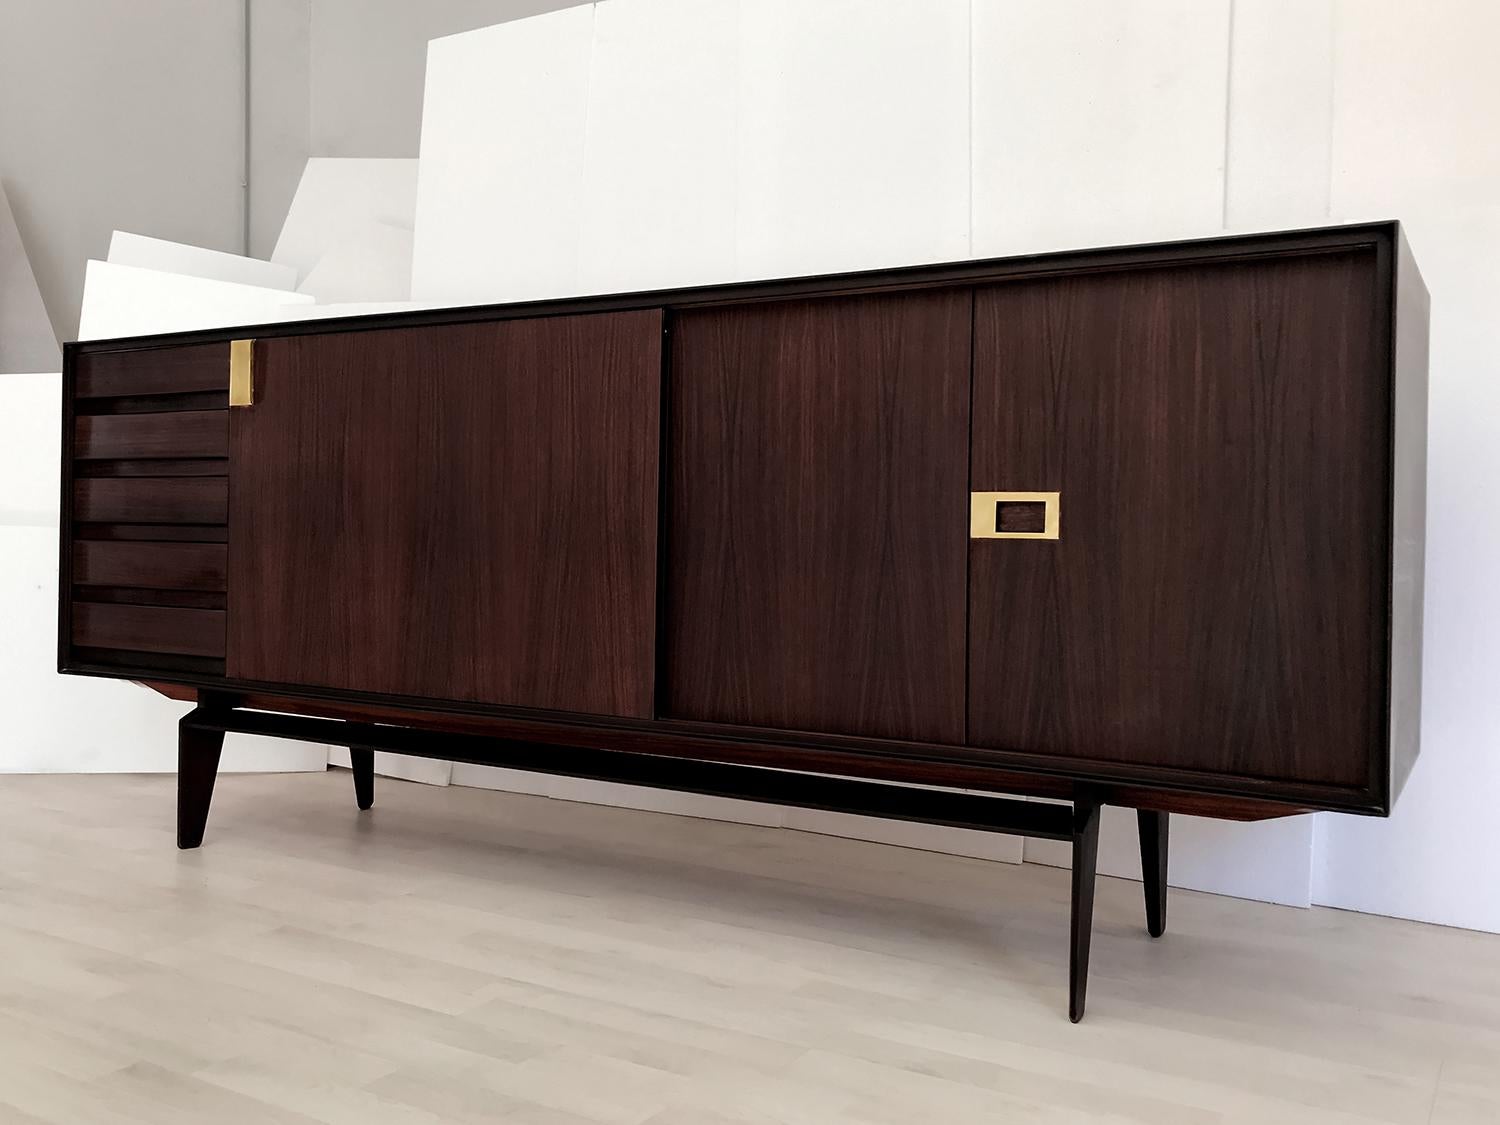 This stylish sideboard has been crafted with a gorgeous material like as teakwood, and it’s finished with brass details.
The internal cabinet is provided with shelves offering plenty of room for storage, hidden in the middle from a sliding door and